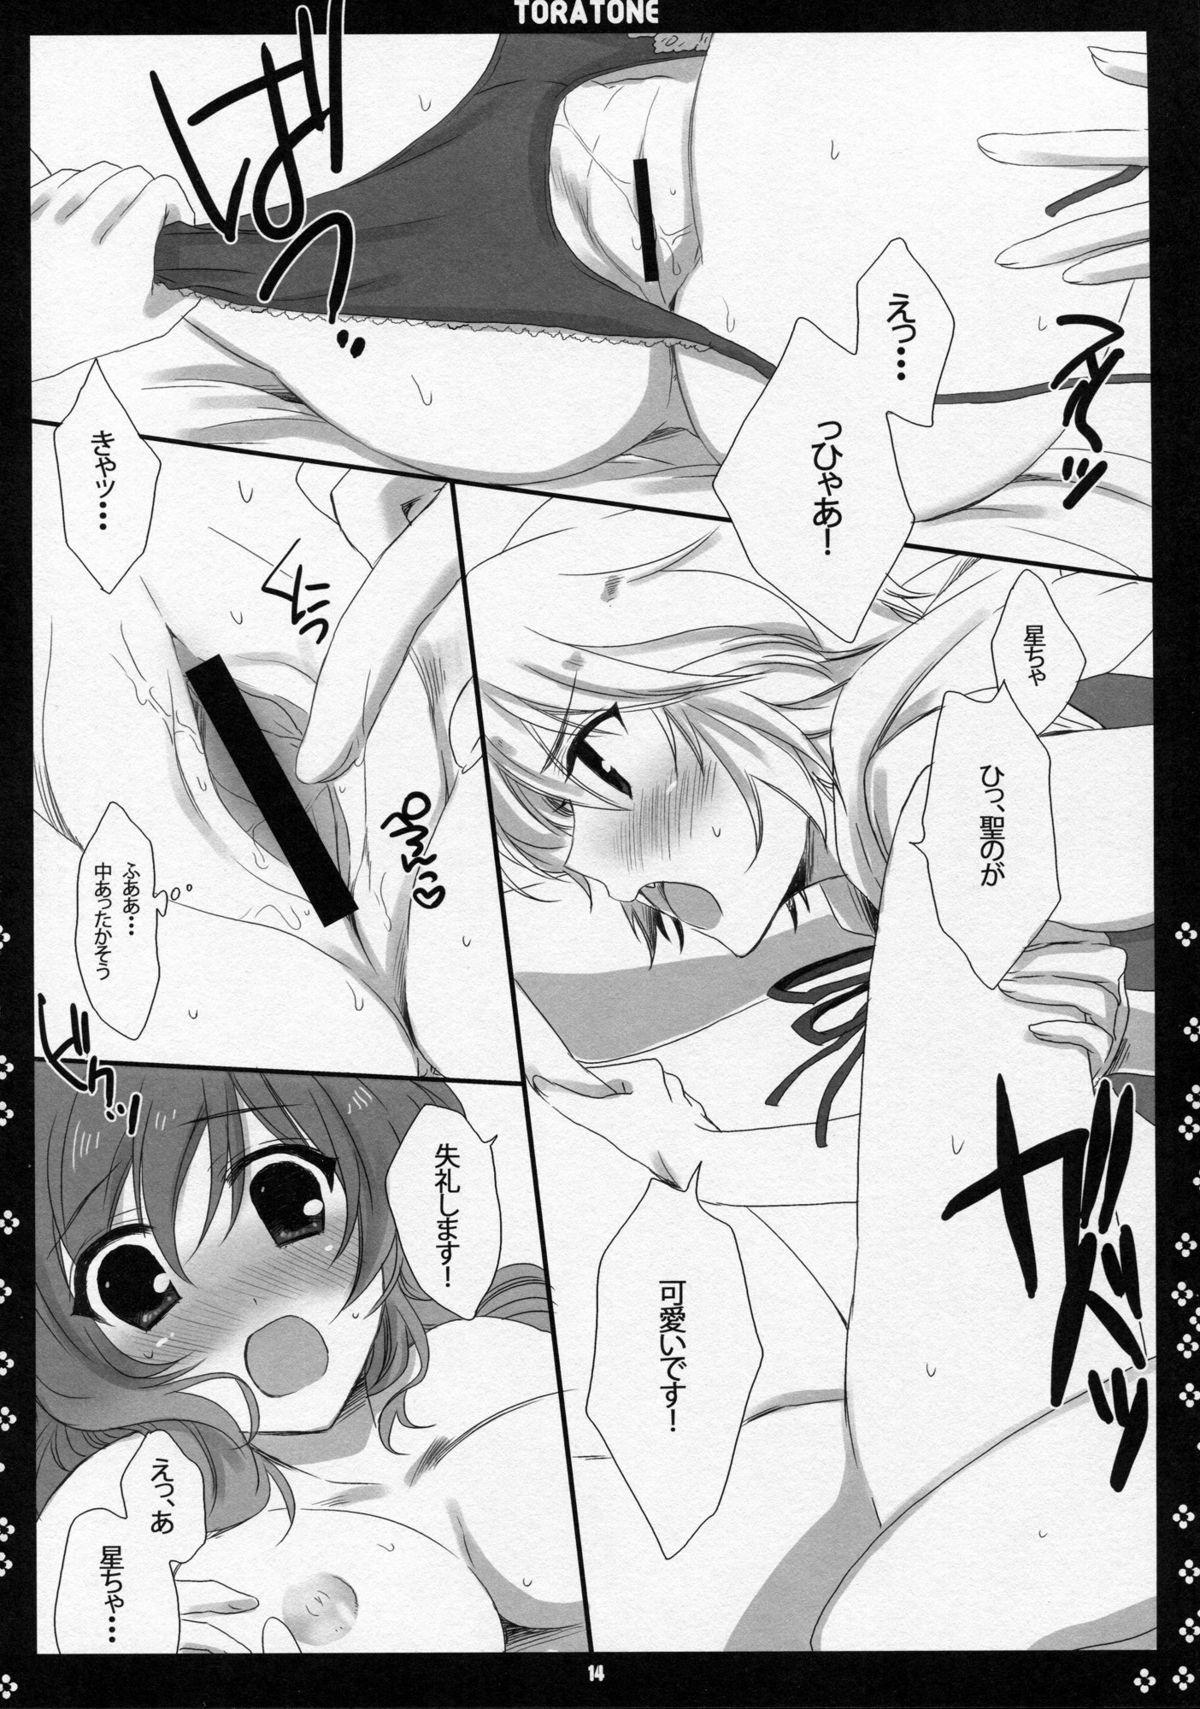 Gay Blowjob TORATONE - Touhou project Suck Cock - Page 13